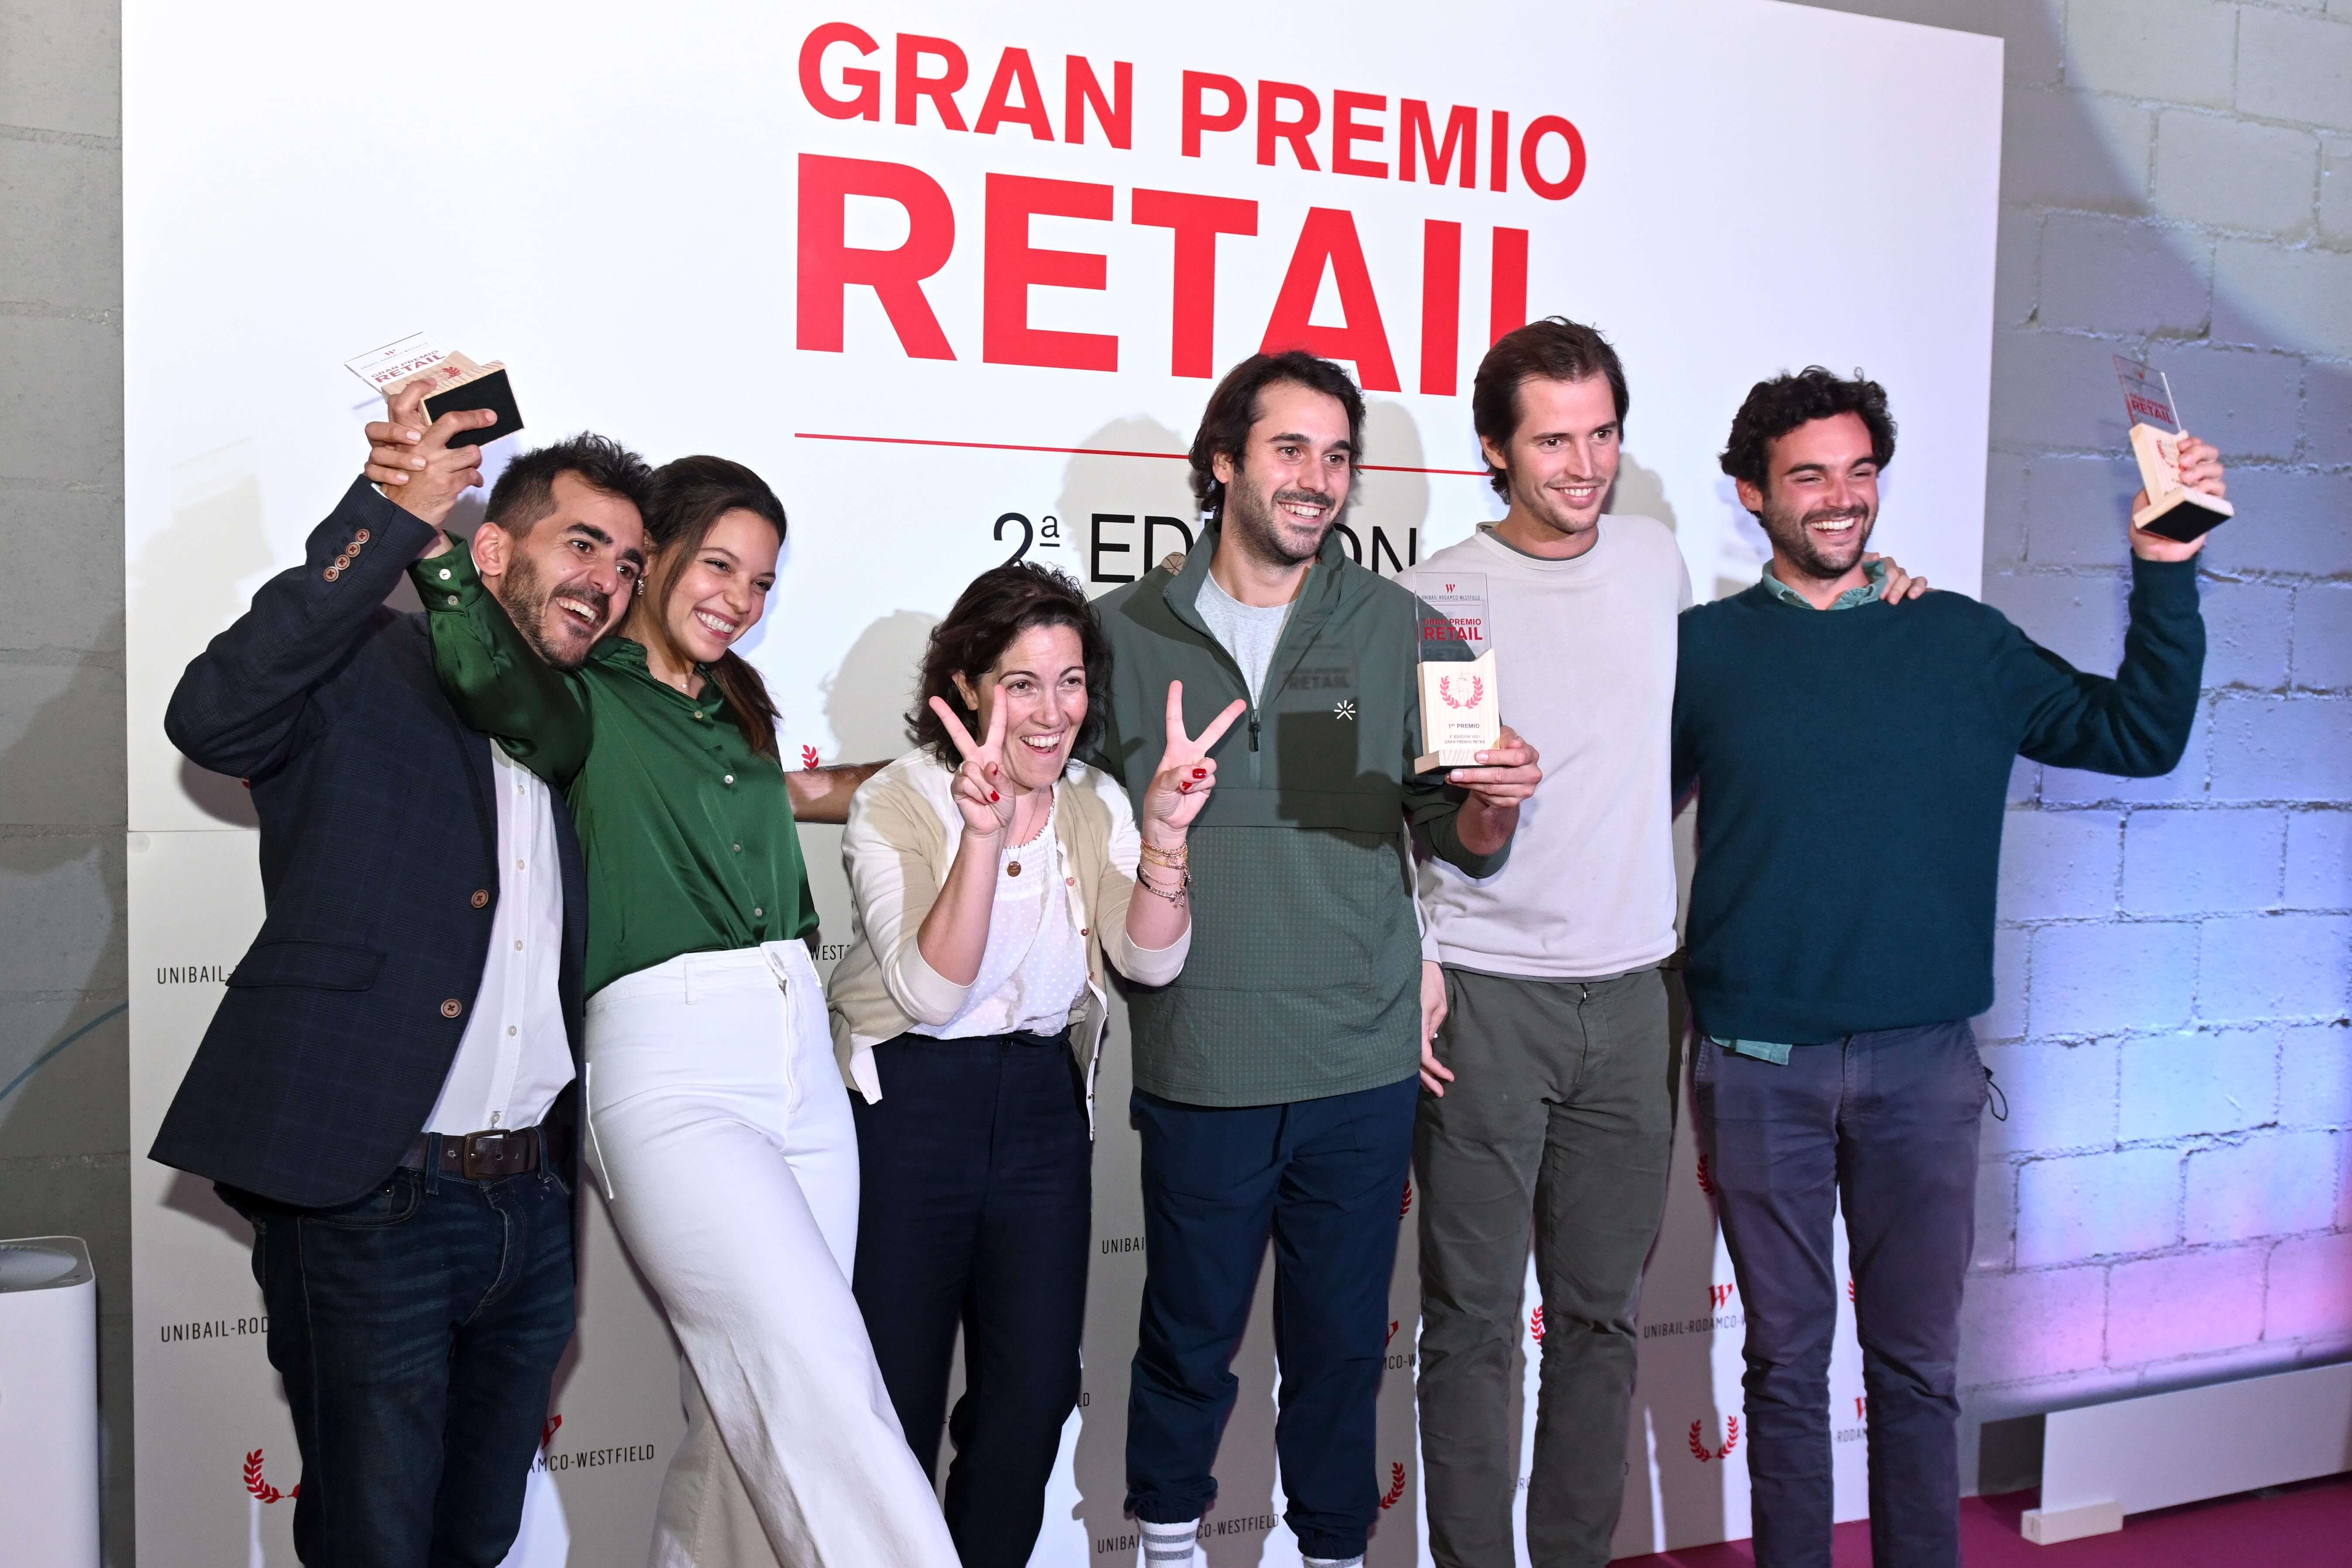 Gran Premio Retail allowed the Group to help launch Spanish entrepreneurs for the second year in a row.